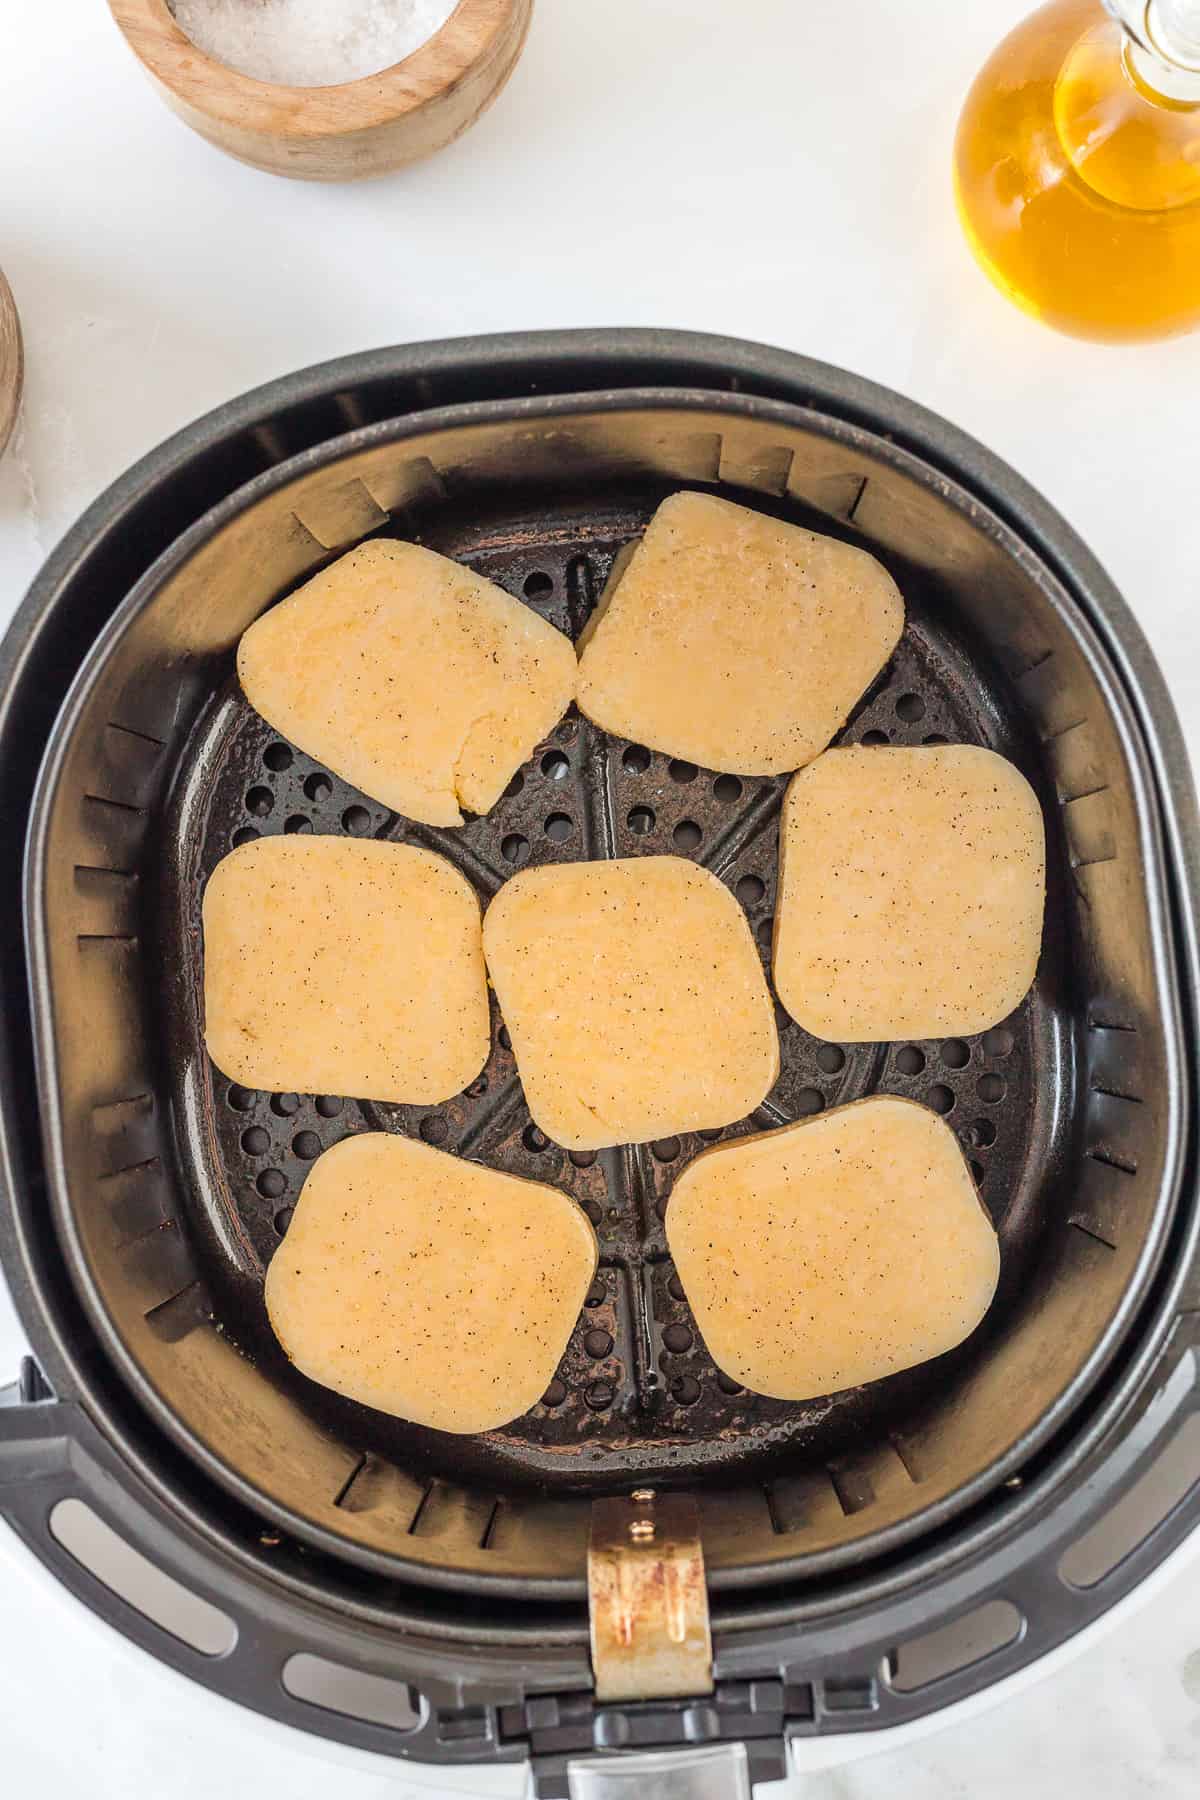 uncooked slices of polenta in the basket of the air fryer